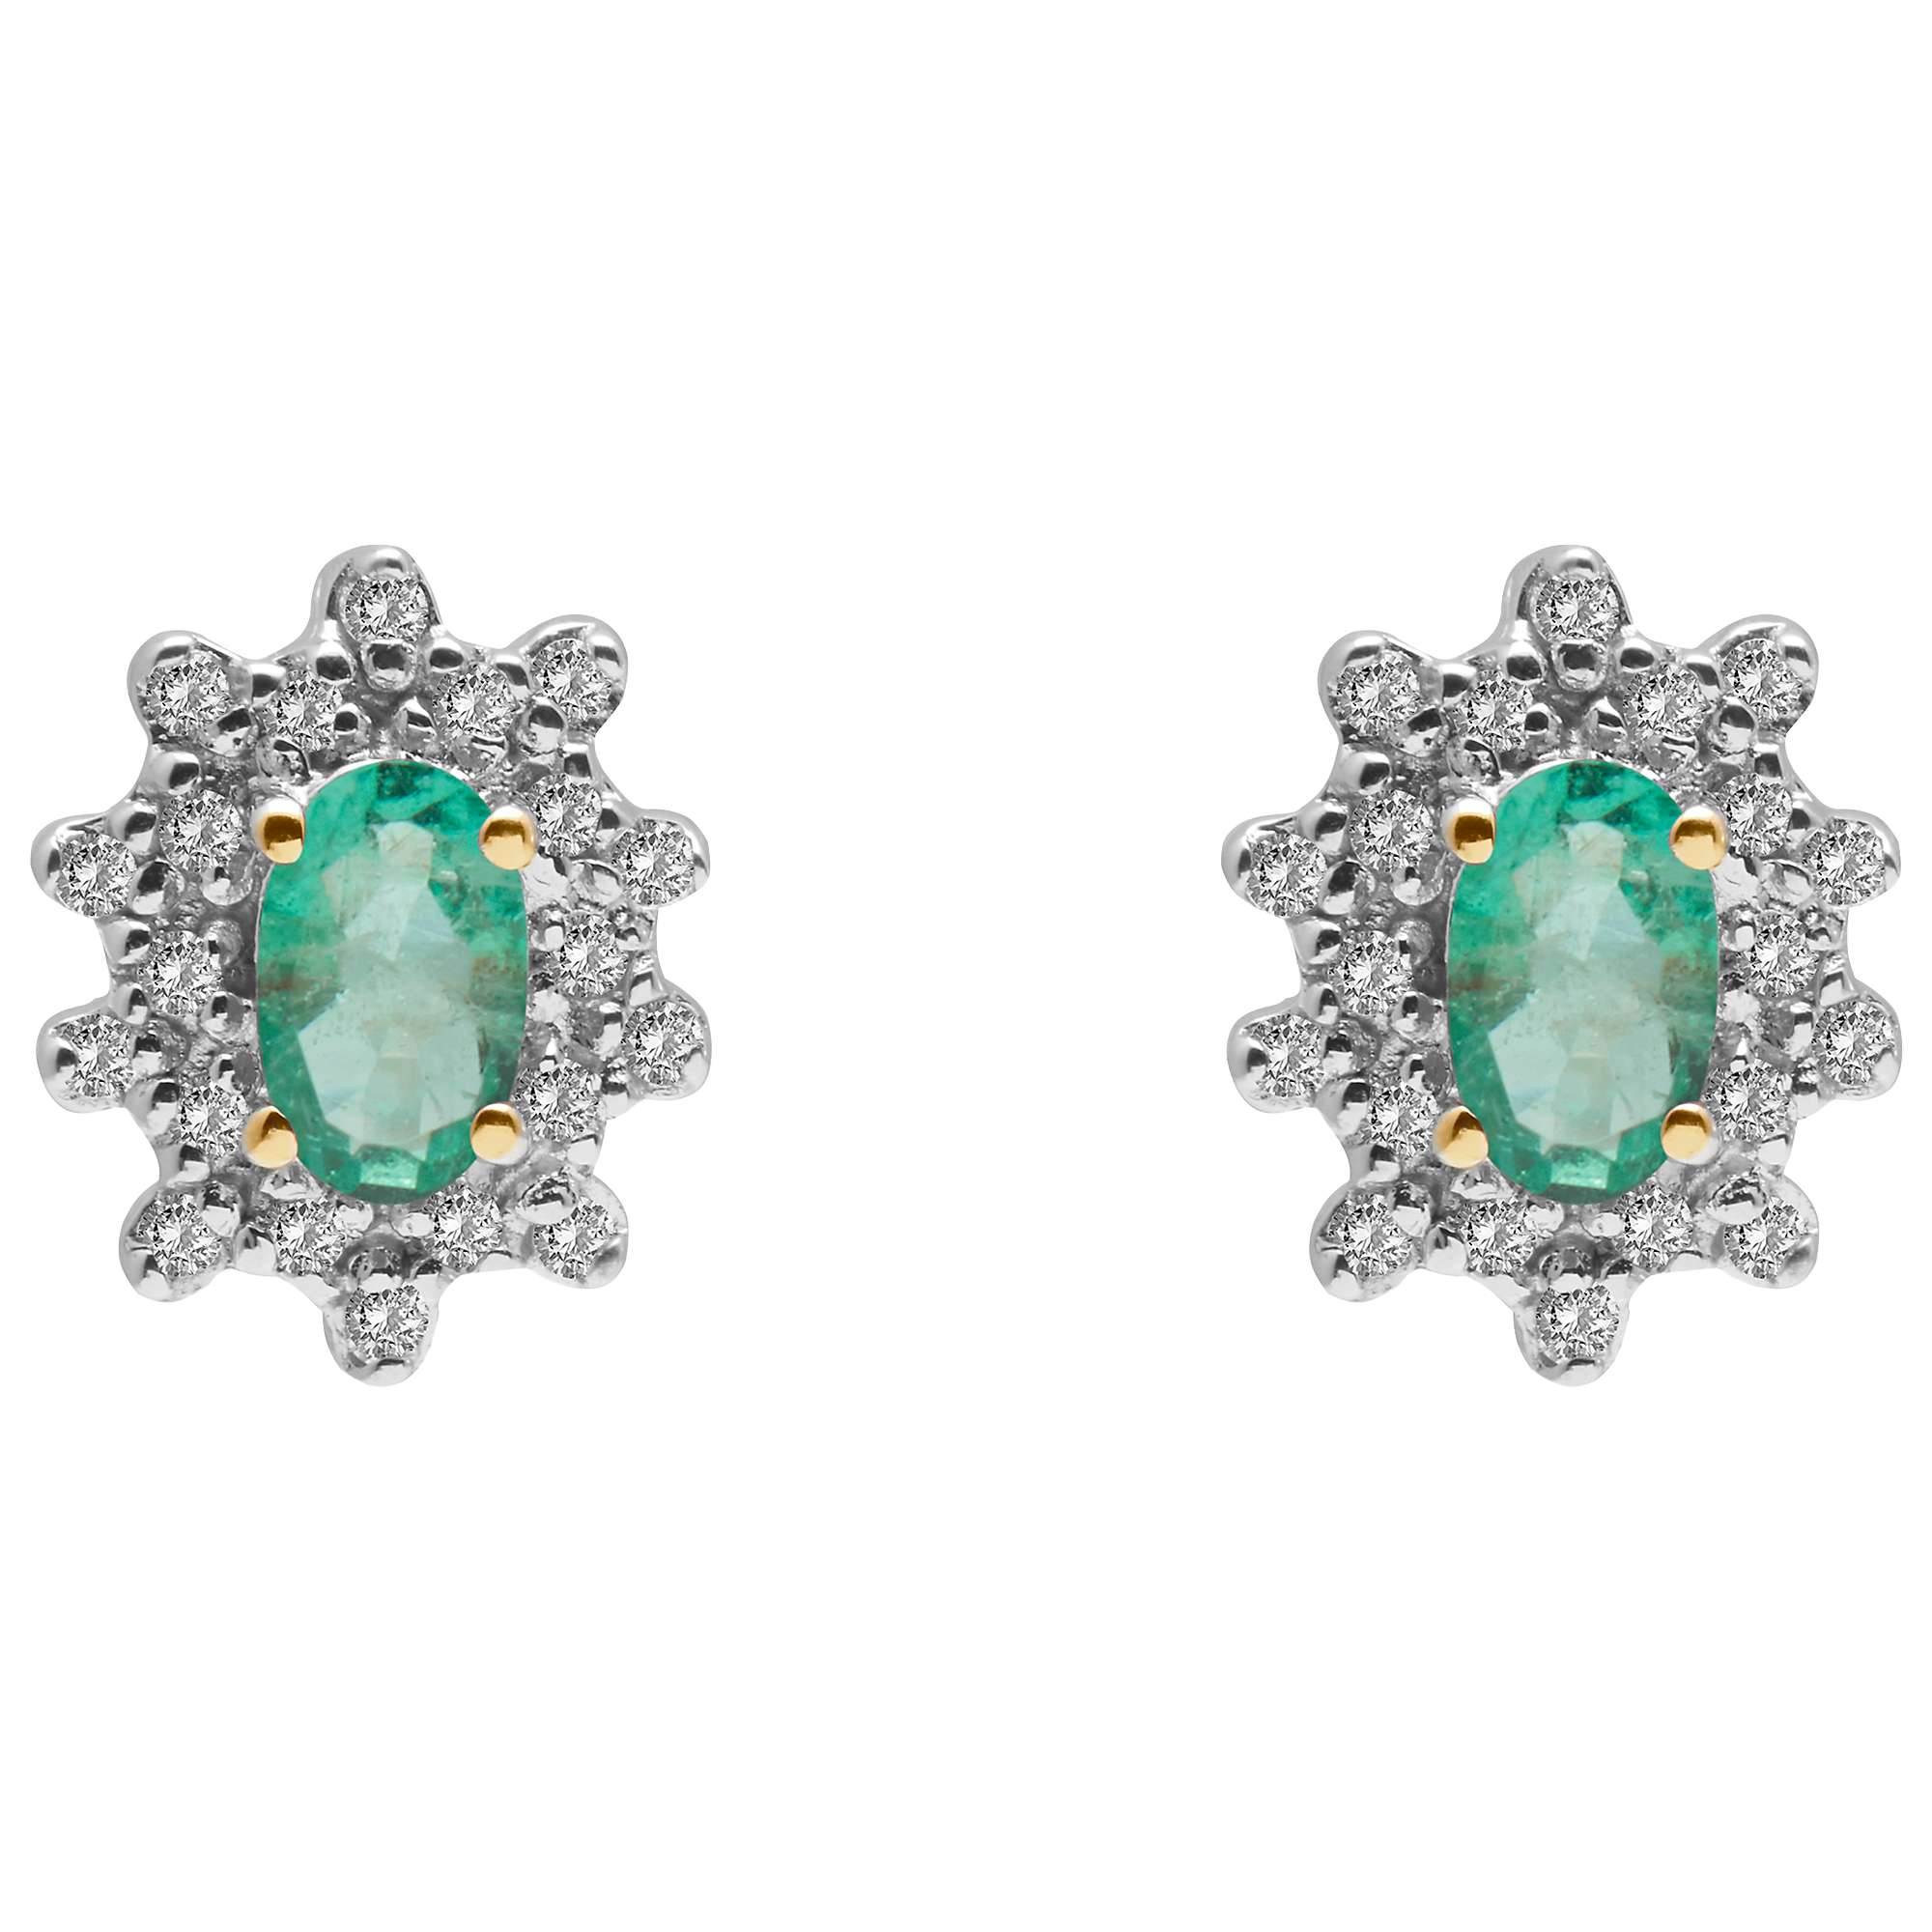 Buy A B Davis 9ct Gold Oval Precious Stone and Cluster Diamond Stud Earrings Online at johnlewis.com